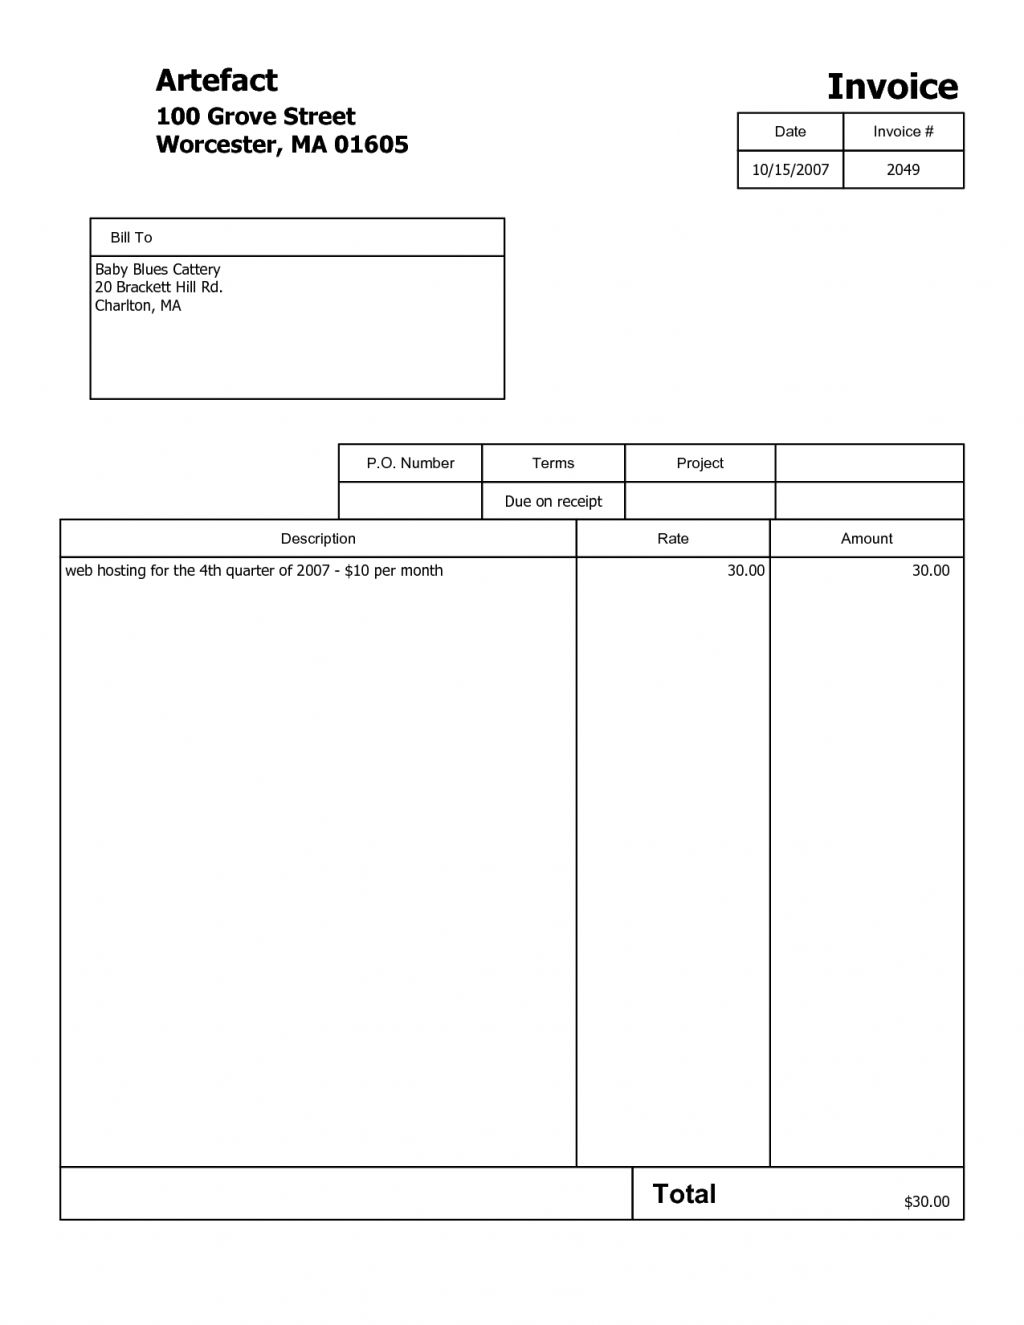 invoice format free download invoice format free download free free download invoice format